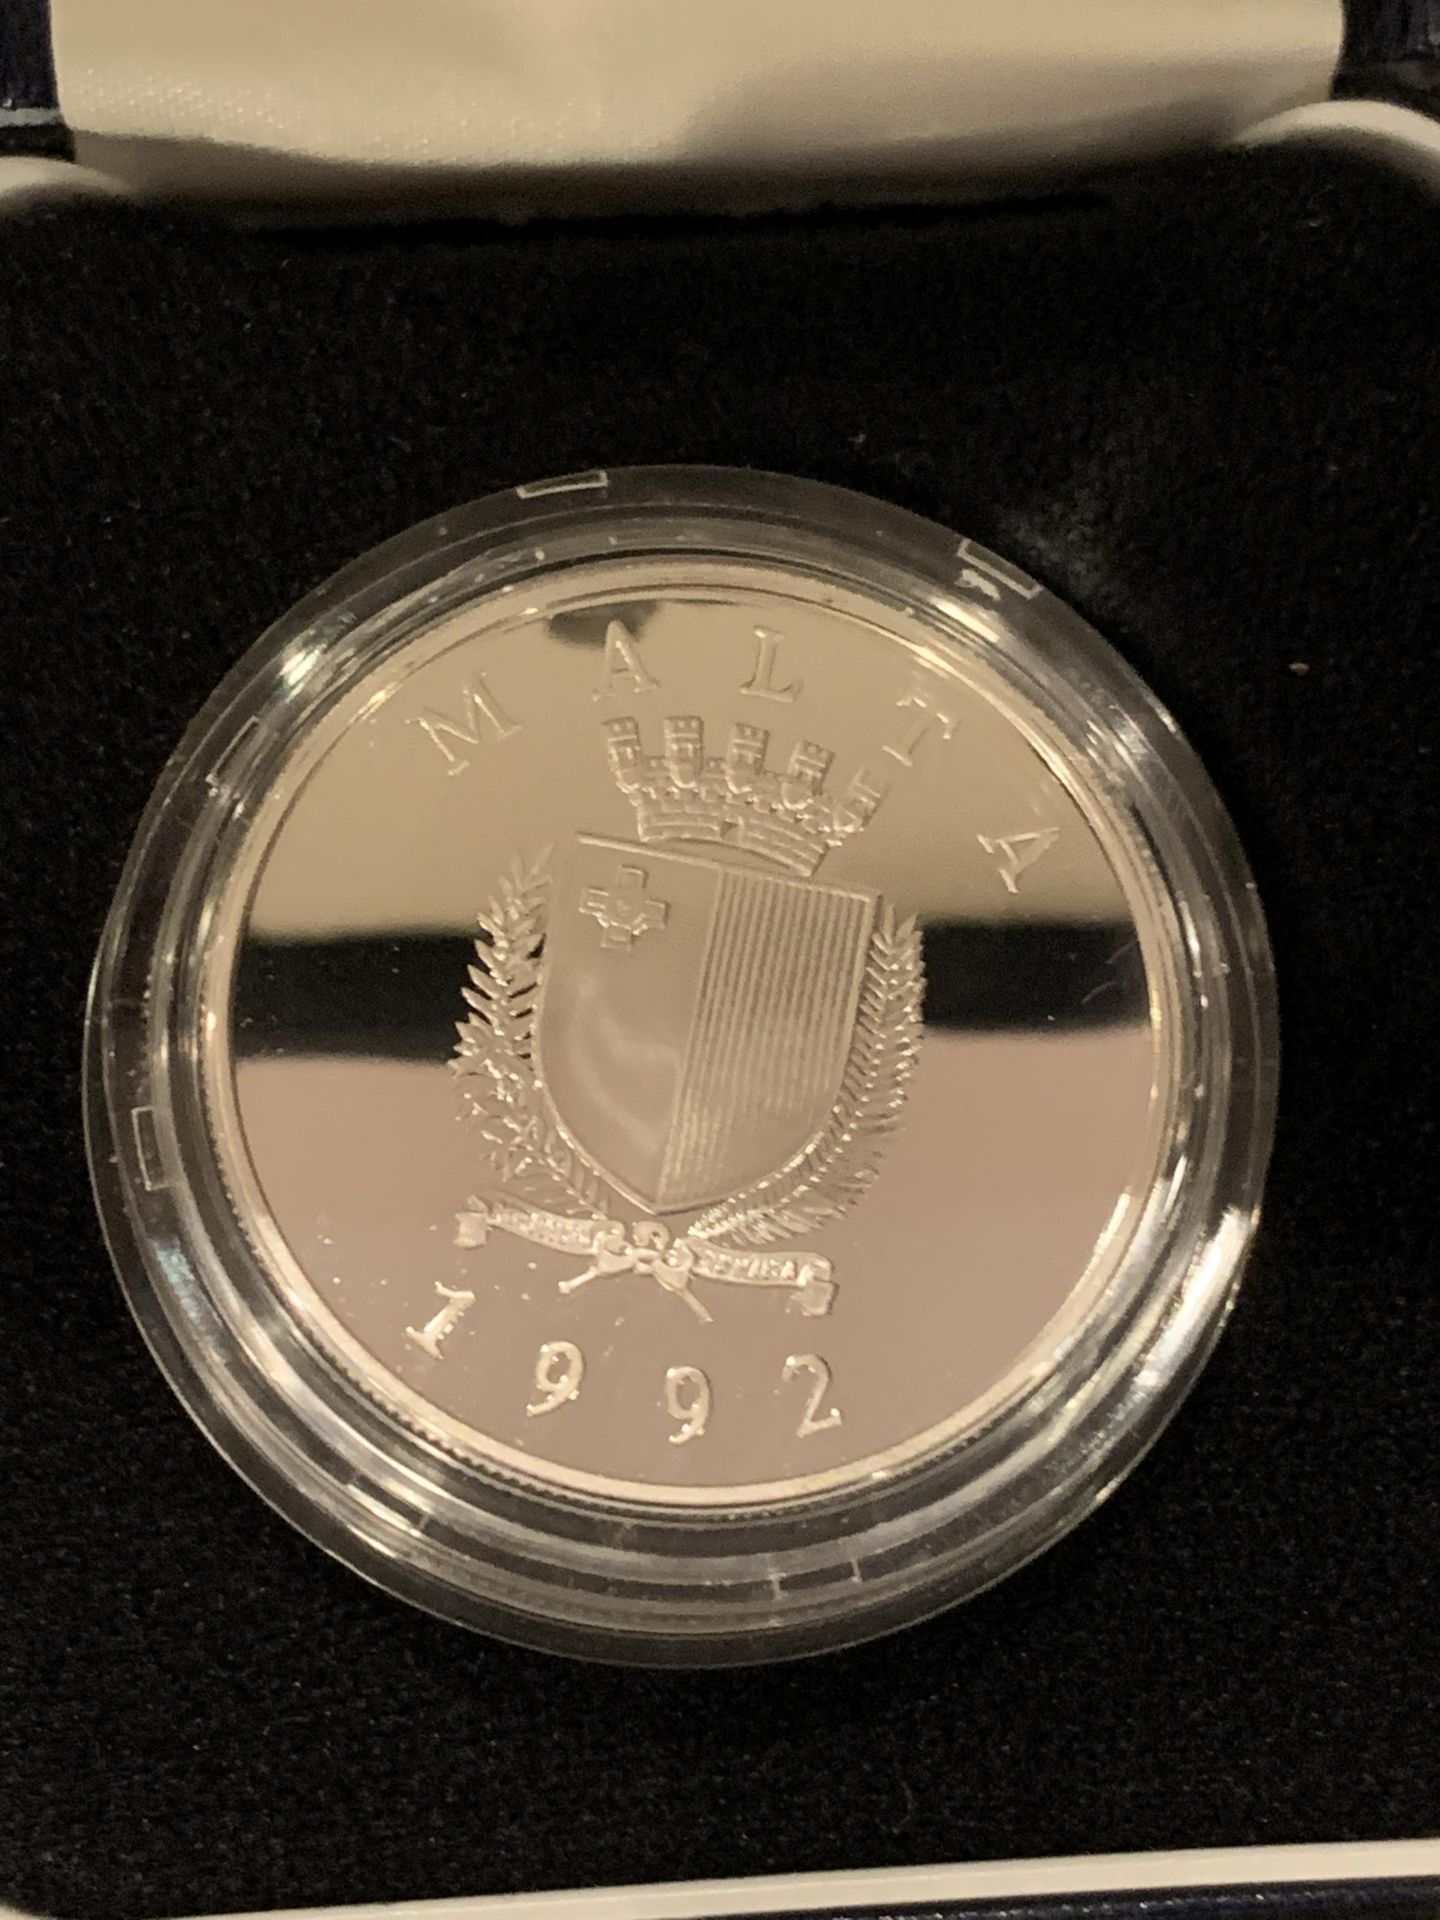 MALTA 1992 , GEORGE CROSS ANNIVERSARY LM5 , SILVER PROOF COIN . CASED WITH COA - Image 3 of 3